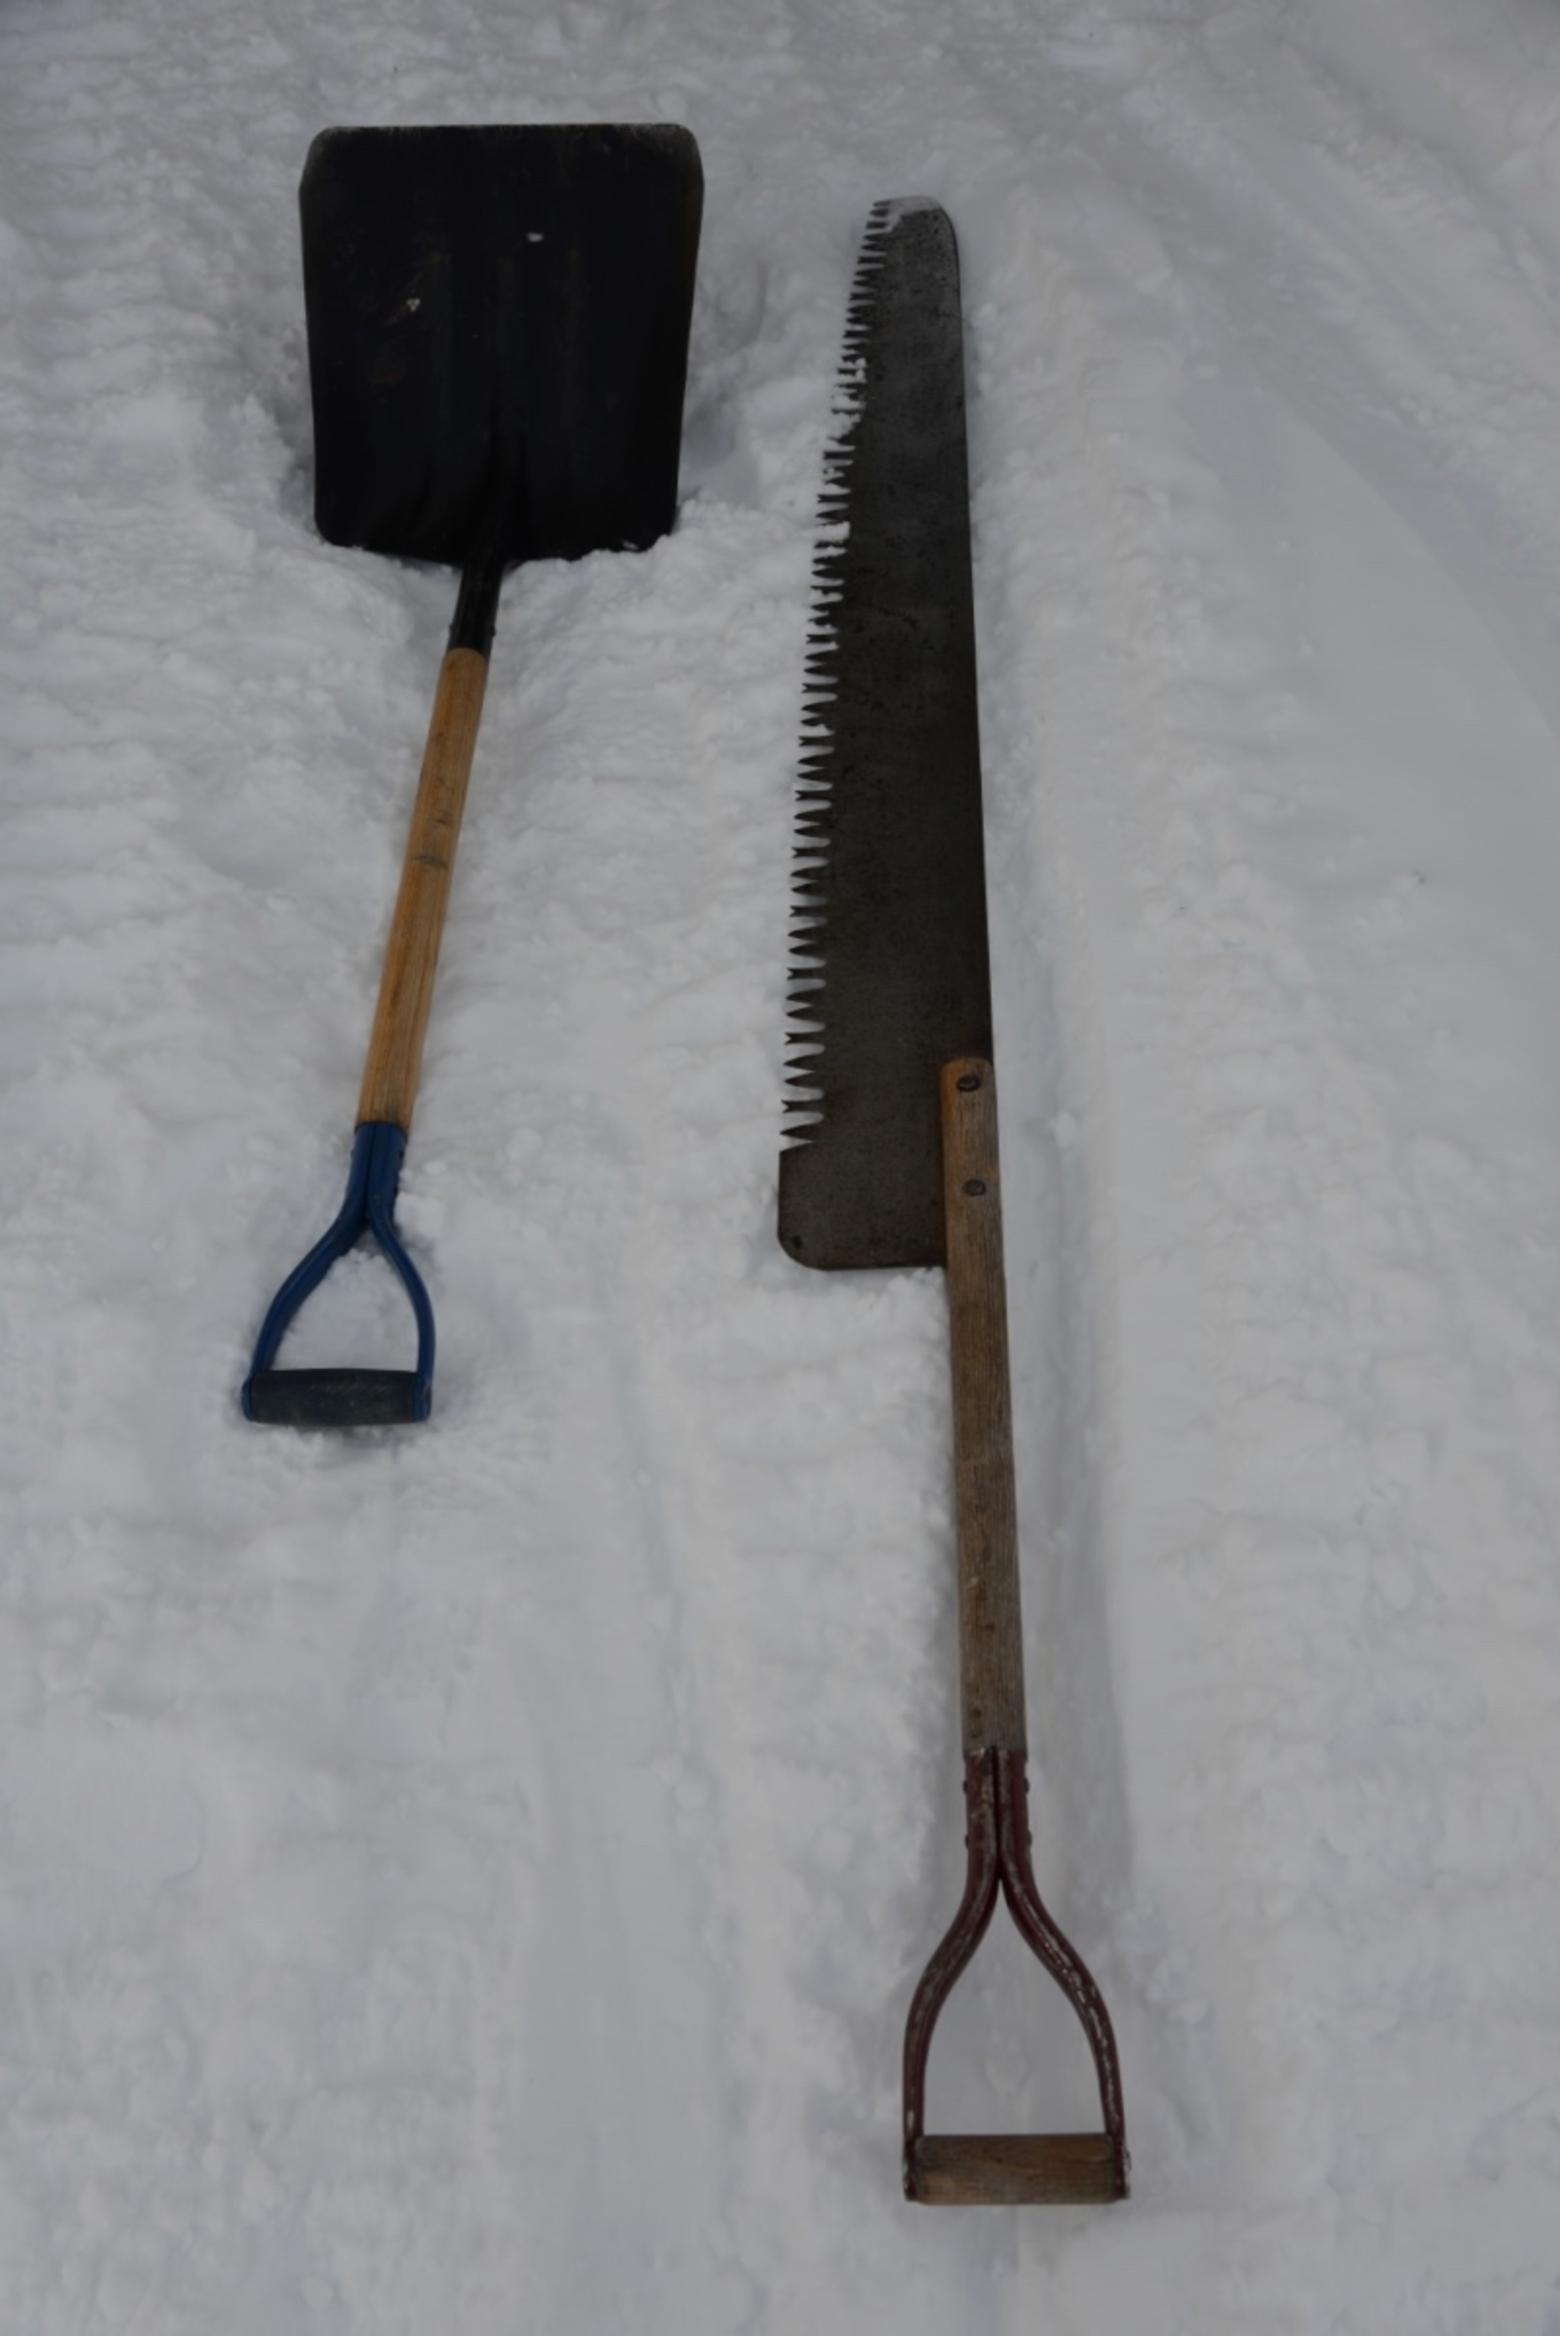 The winterkeeeper's humble tools of the trade. No snowblowers are taken up on a pitched roof.